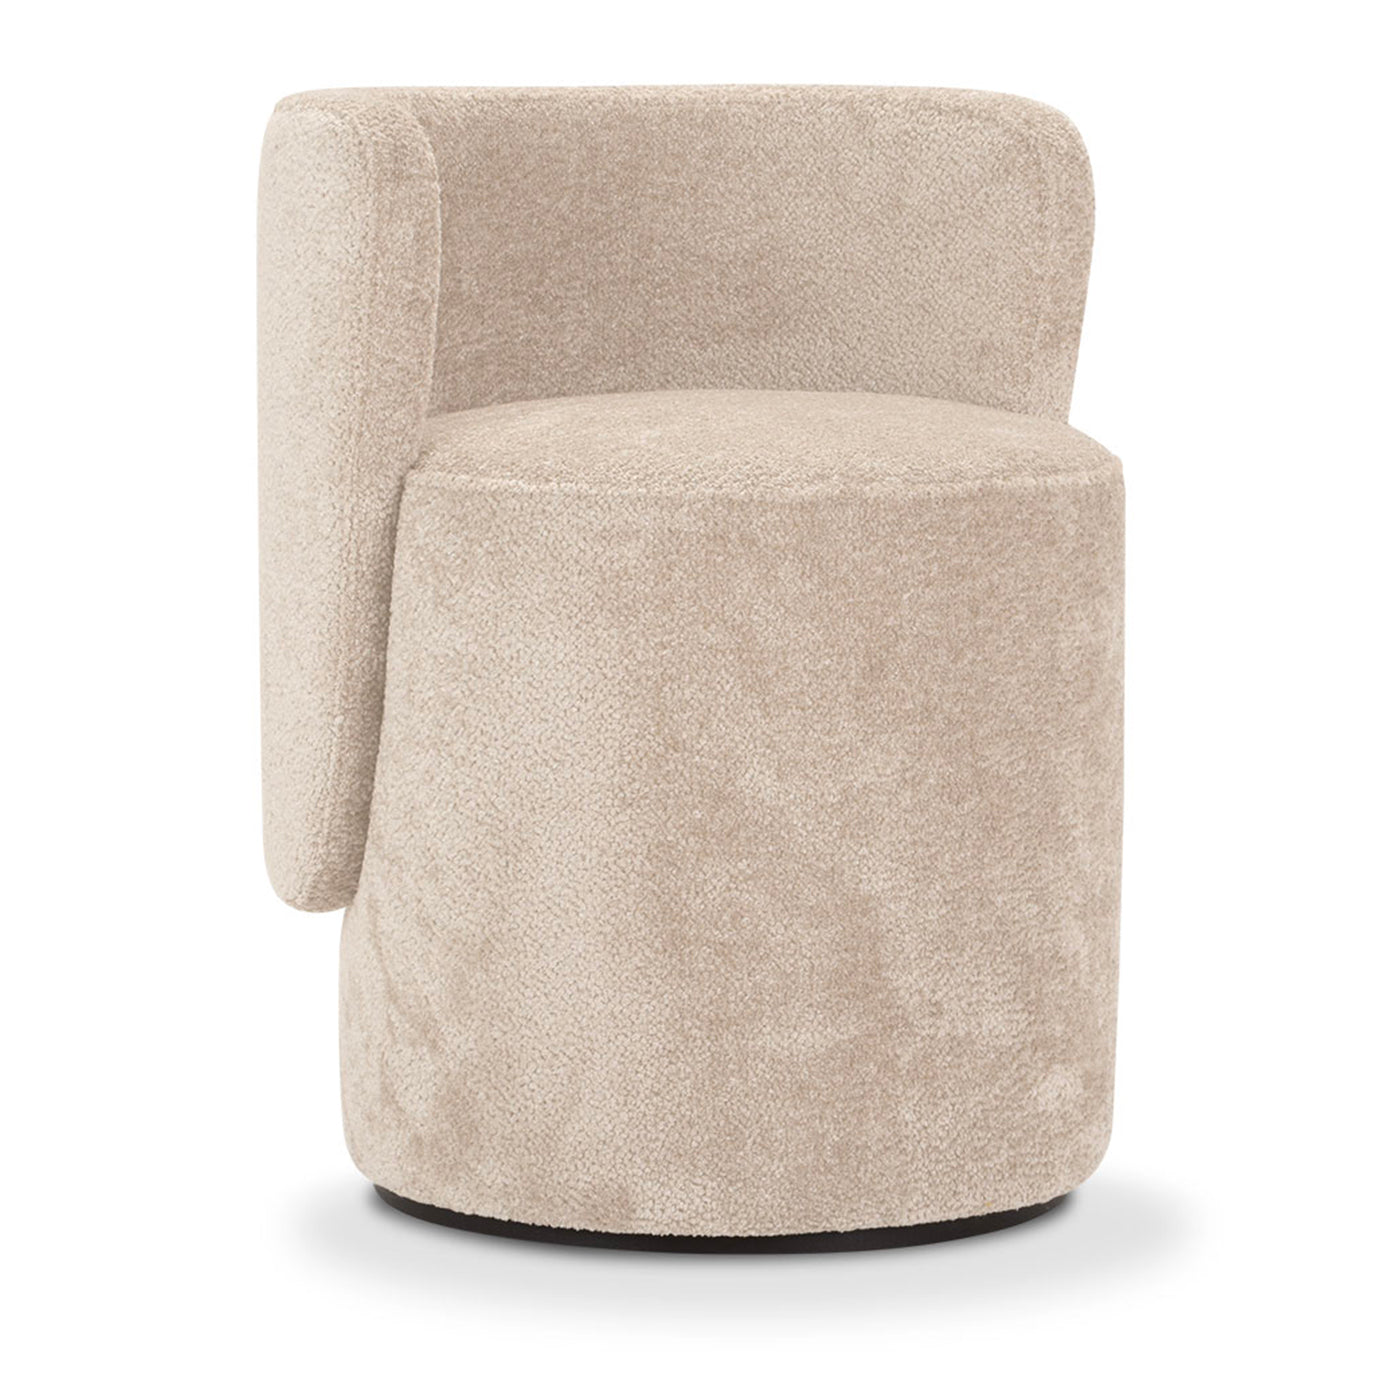 Boll Cylindrical Beige Textile Lounge Chair by Simone Micheli - Alternative view 1